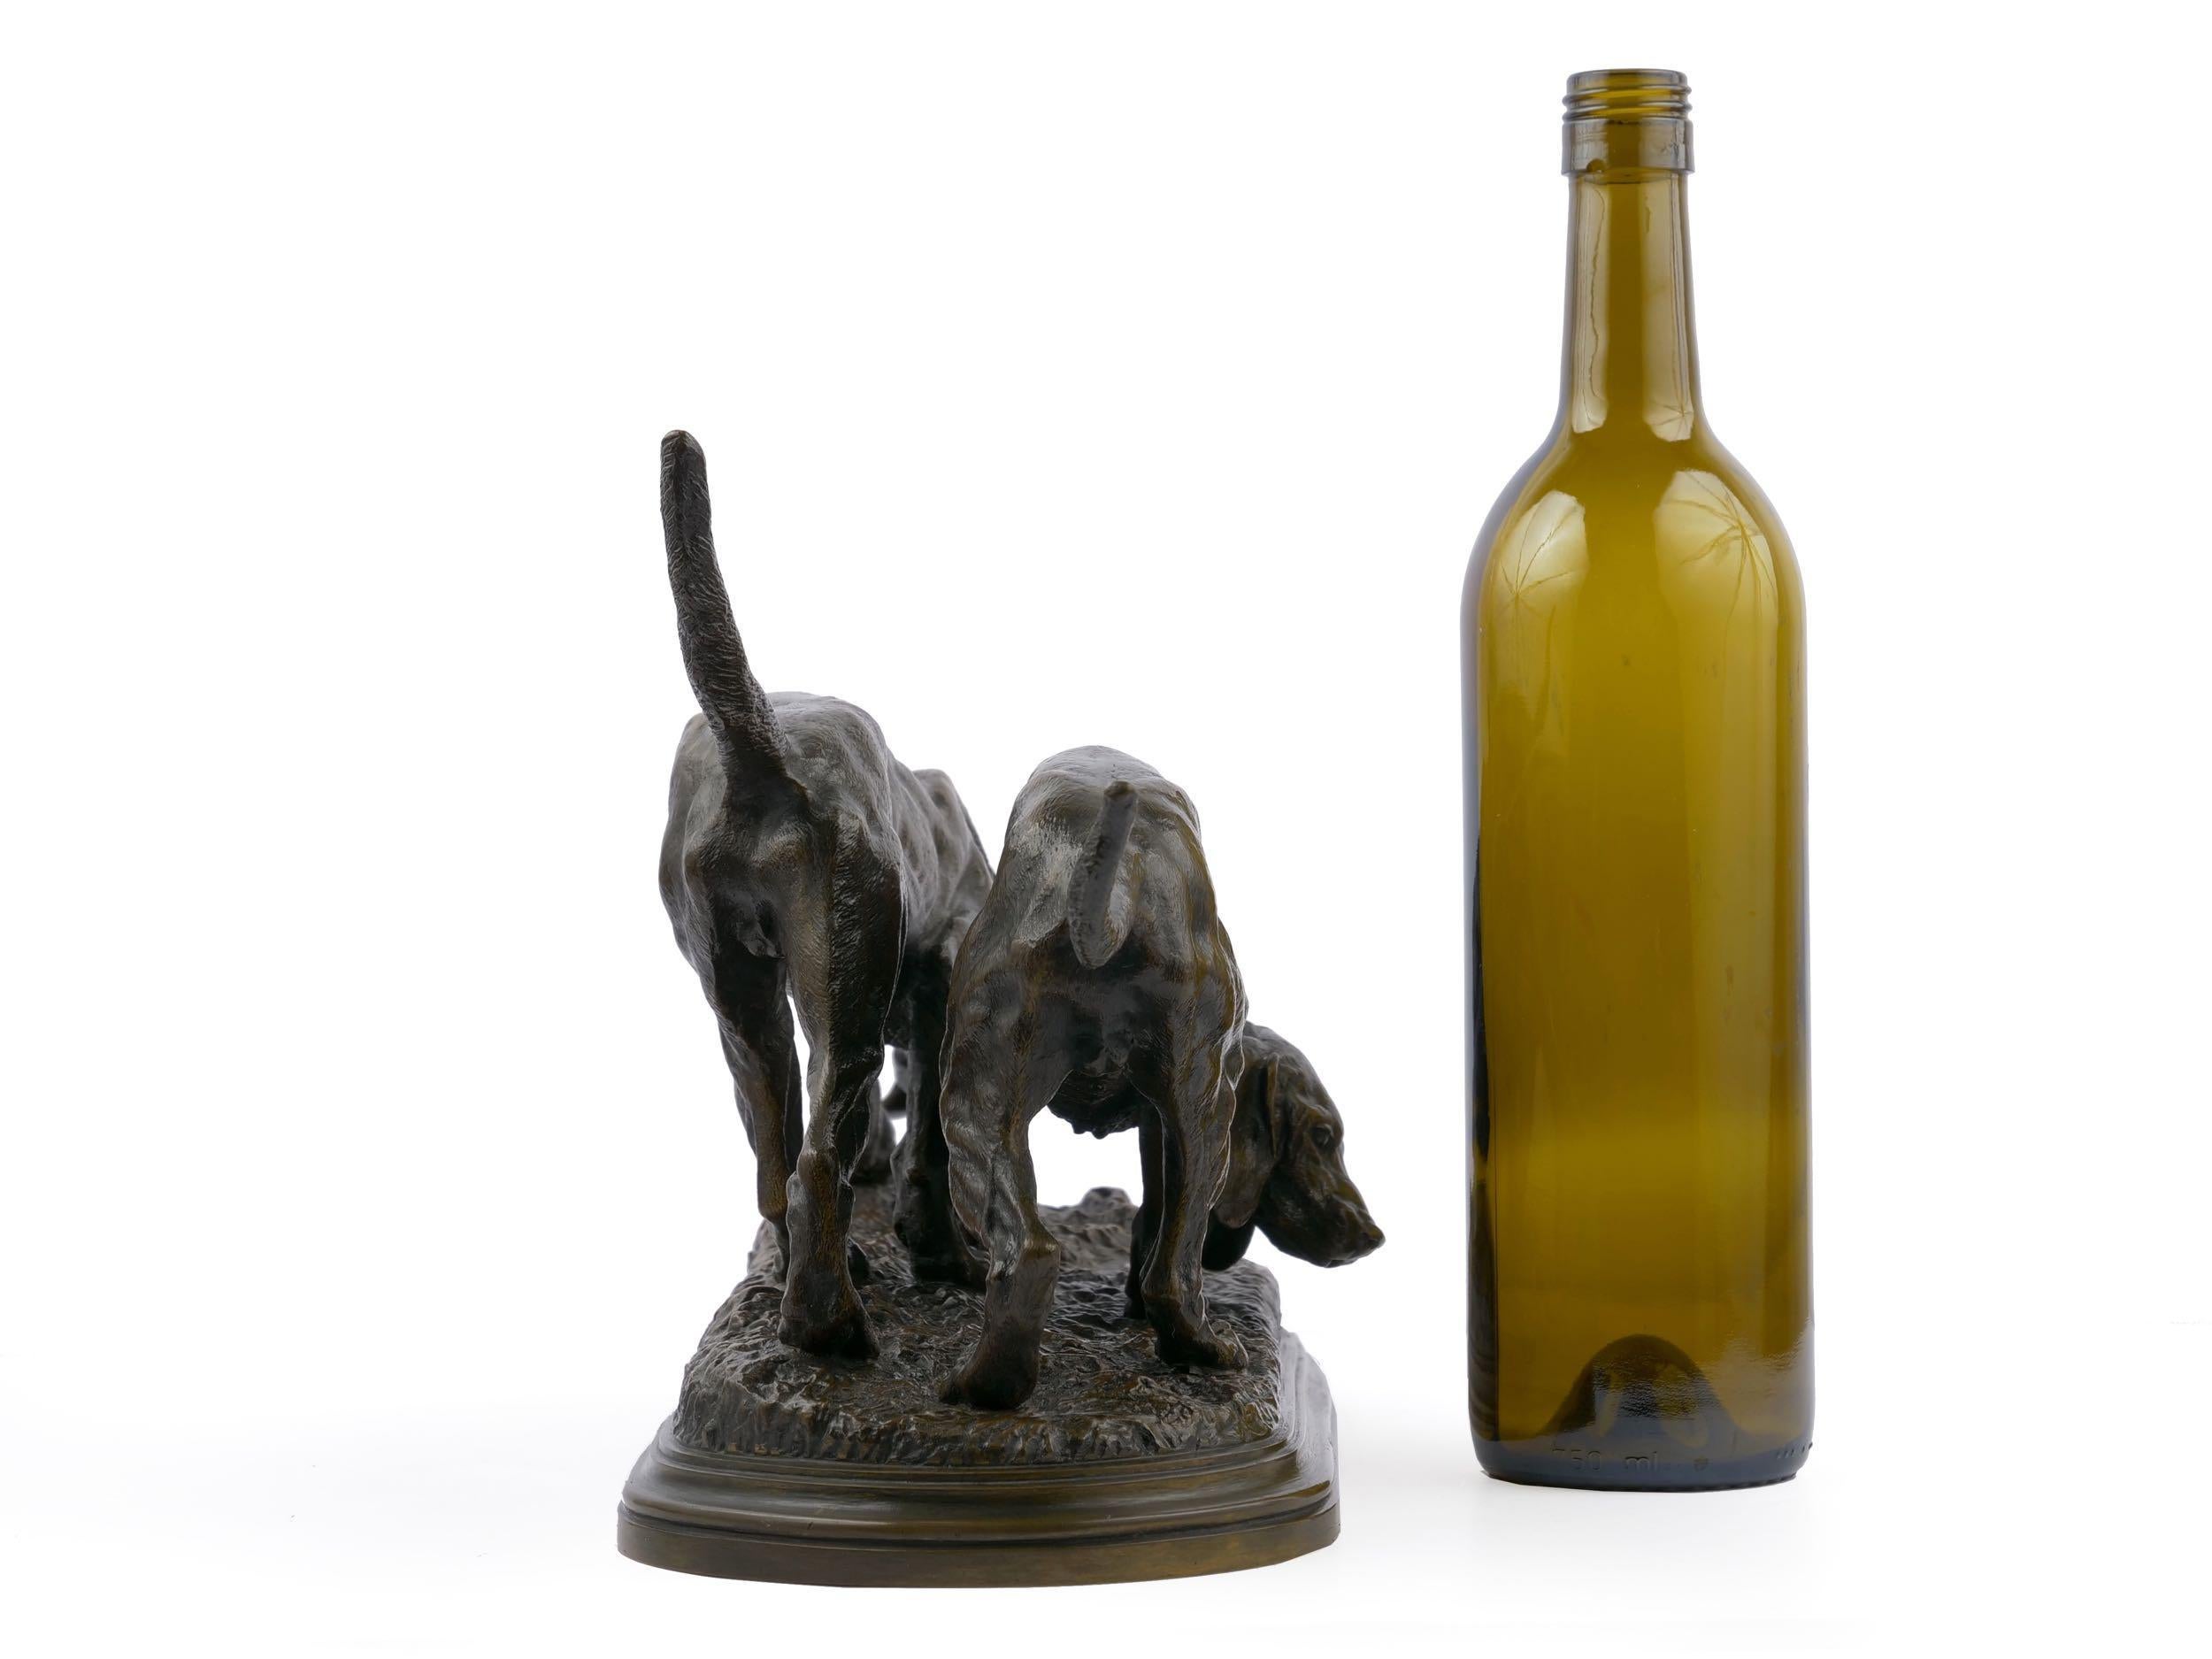 19th Century French Antique Bronze Sculpture of Two Hound Dogs by Isidore Jules Bonheur